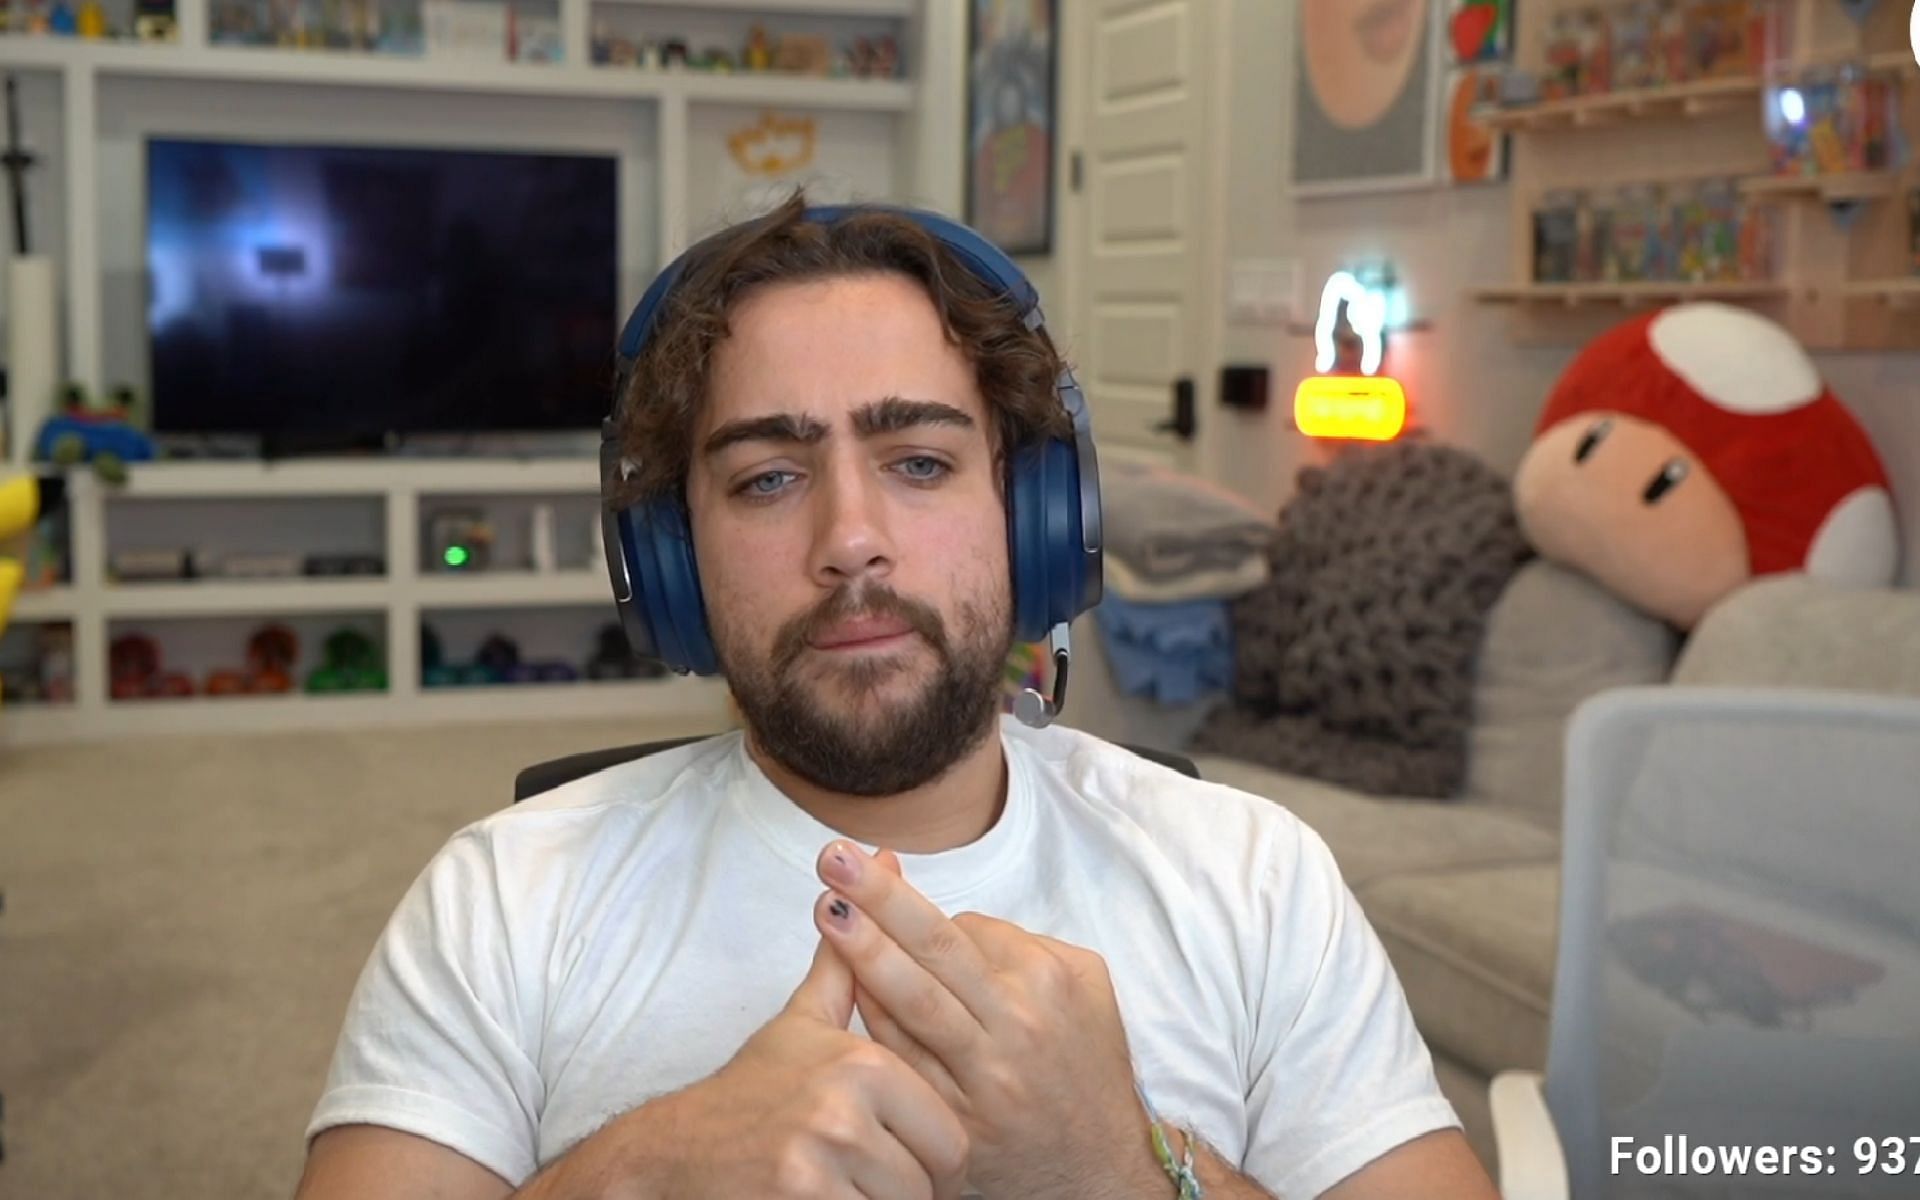 Twitch streamer discusses about the cheating controversy on his livestream (Image via Mizkif/Twitch)